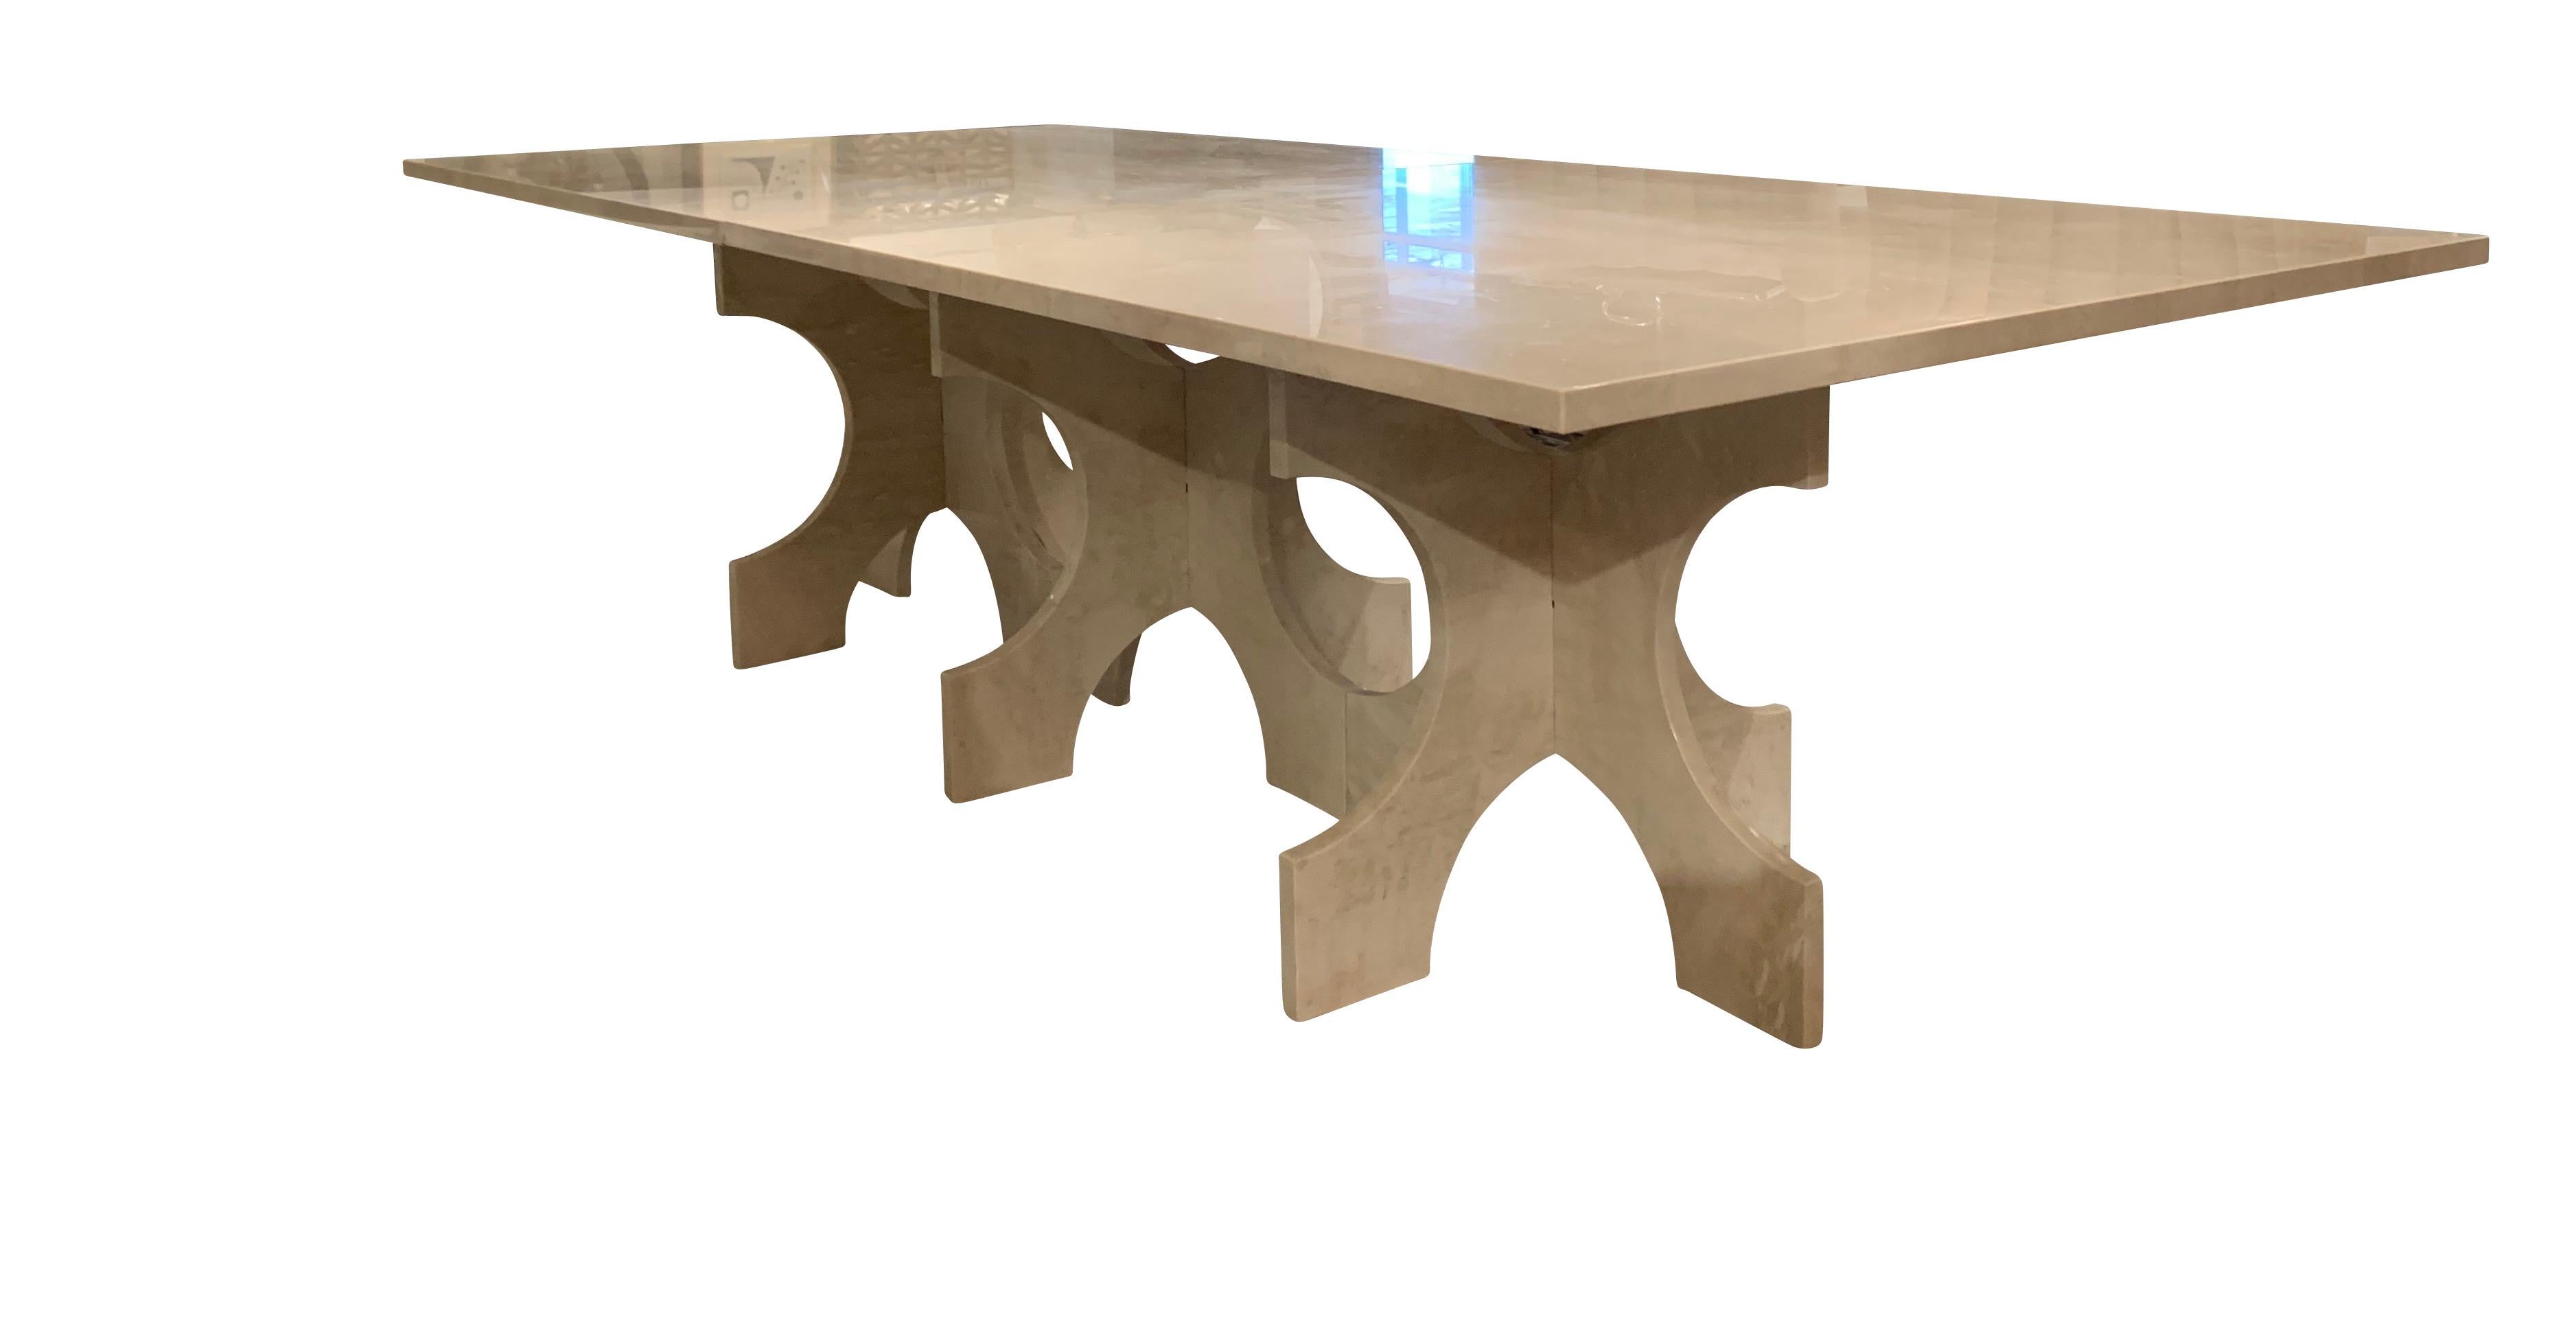 North American Bespoke White Travertine Dining Table, United States, Contemporary